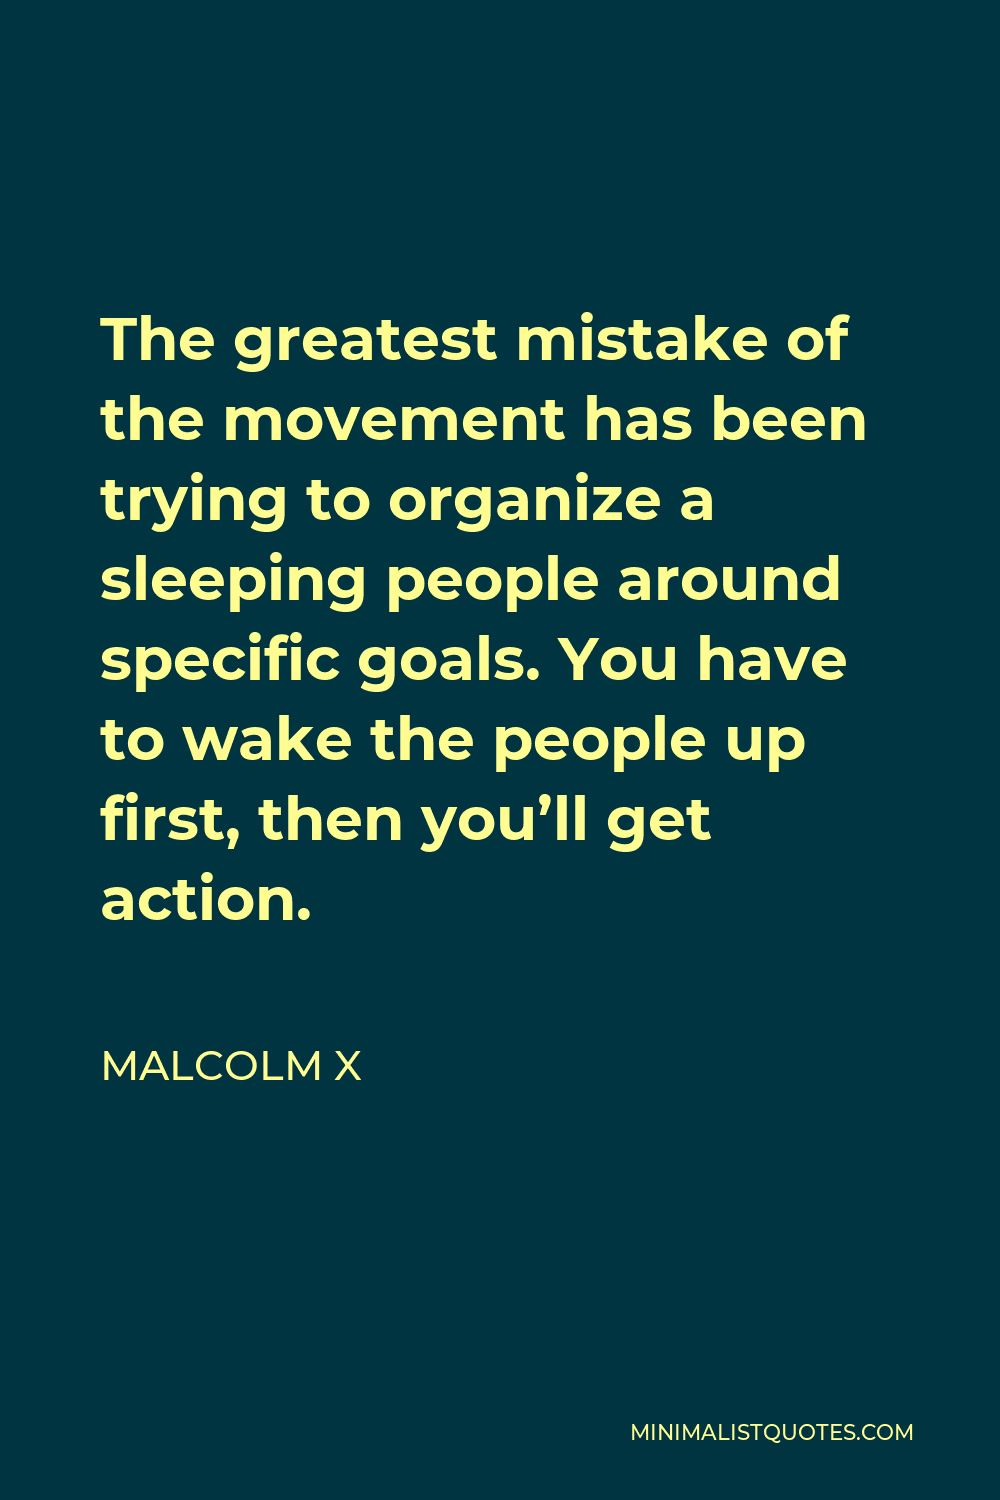 Malcolm X Quote - The greatest mistake of the movement has been trying to organize a sleeping people around specific goals. You have to wake the people up first, then you’ll get action.